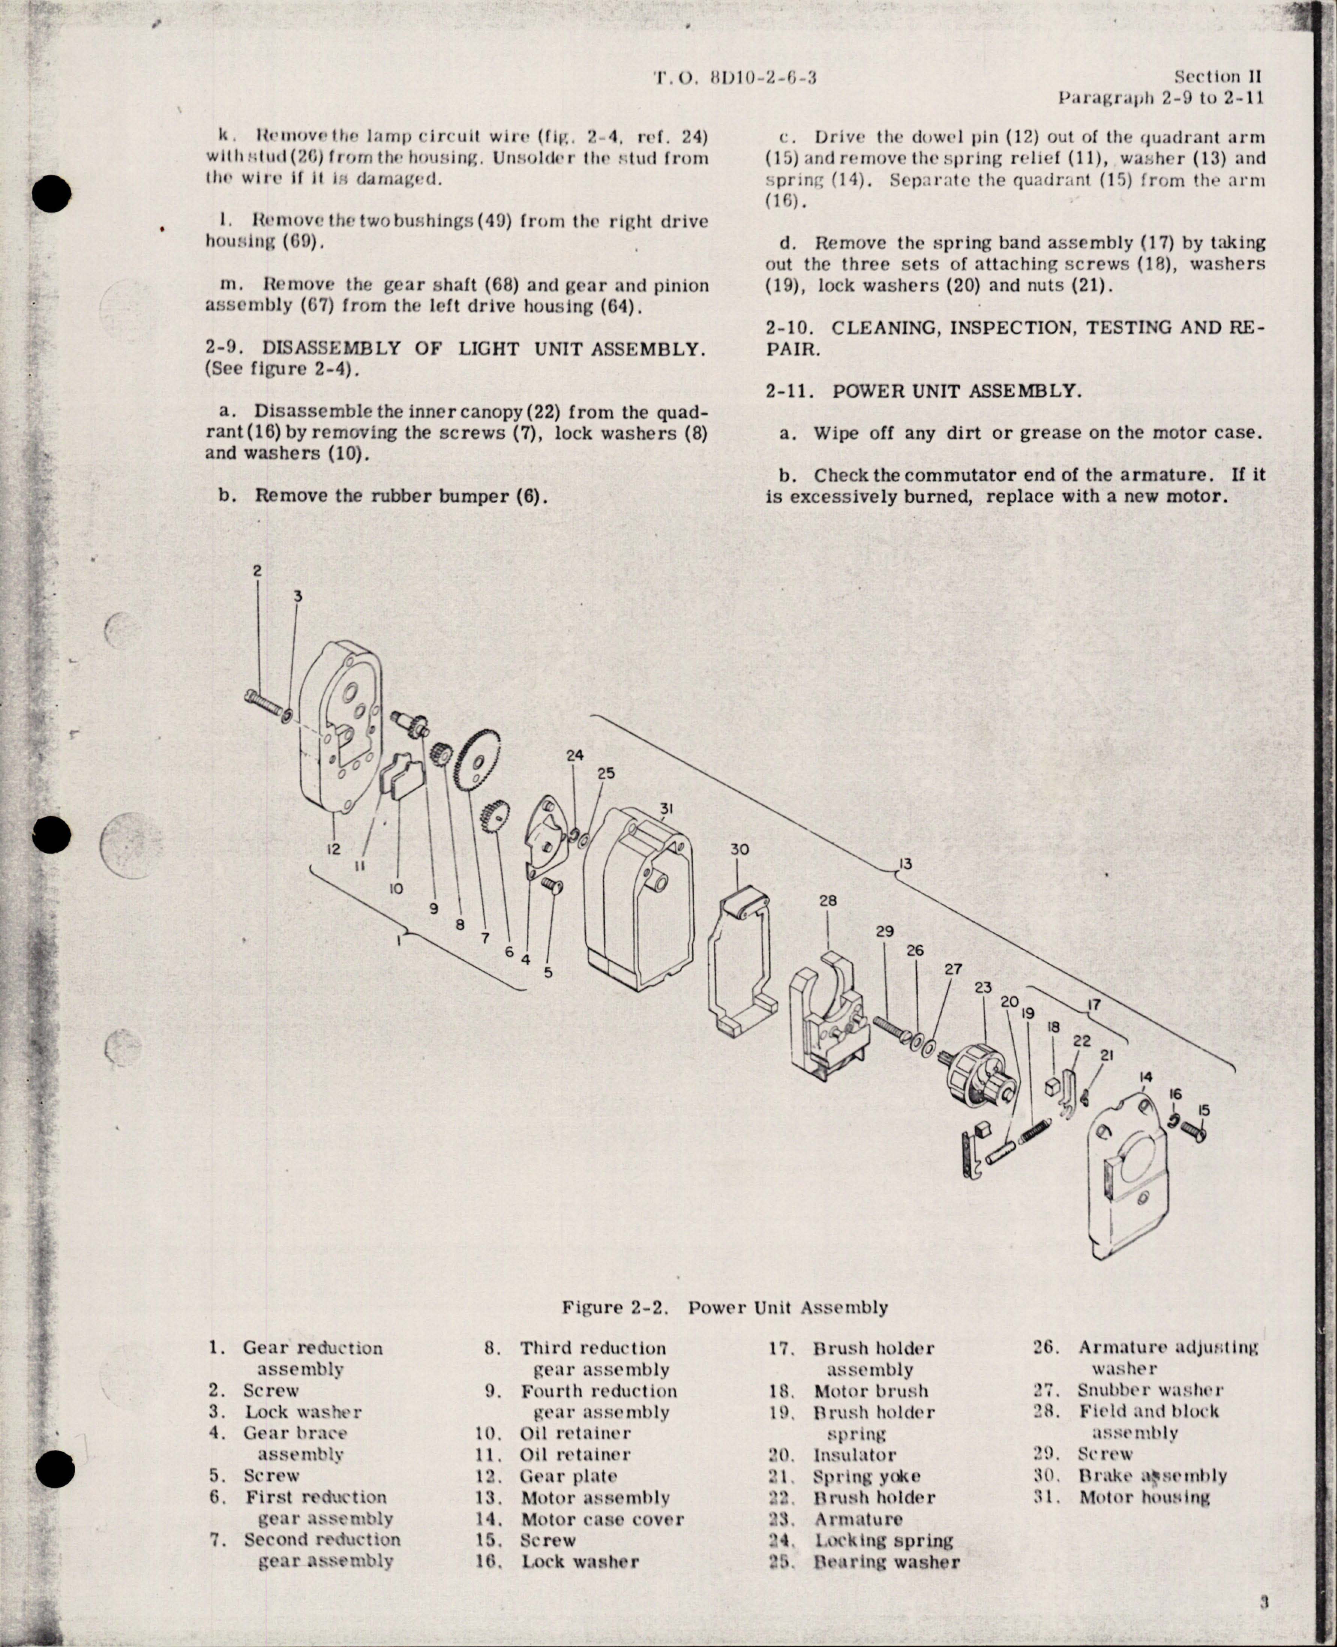 Sample page 7 from AirCorps Library document: Overhaul Instructions for Landing and Taxi Light Assemblies 